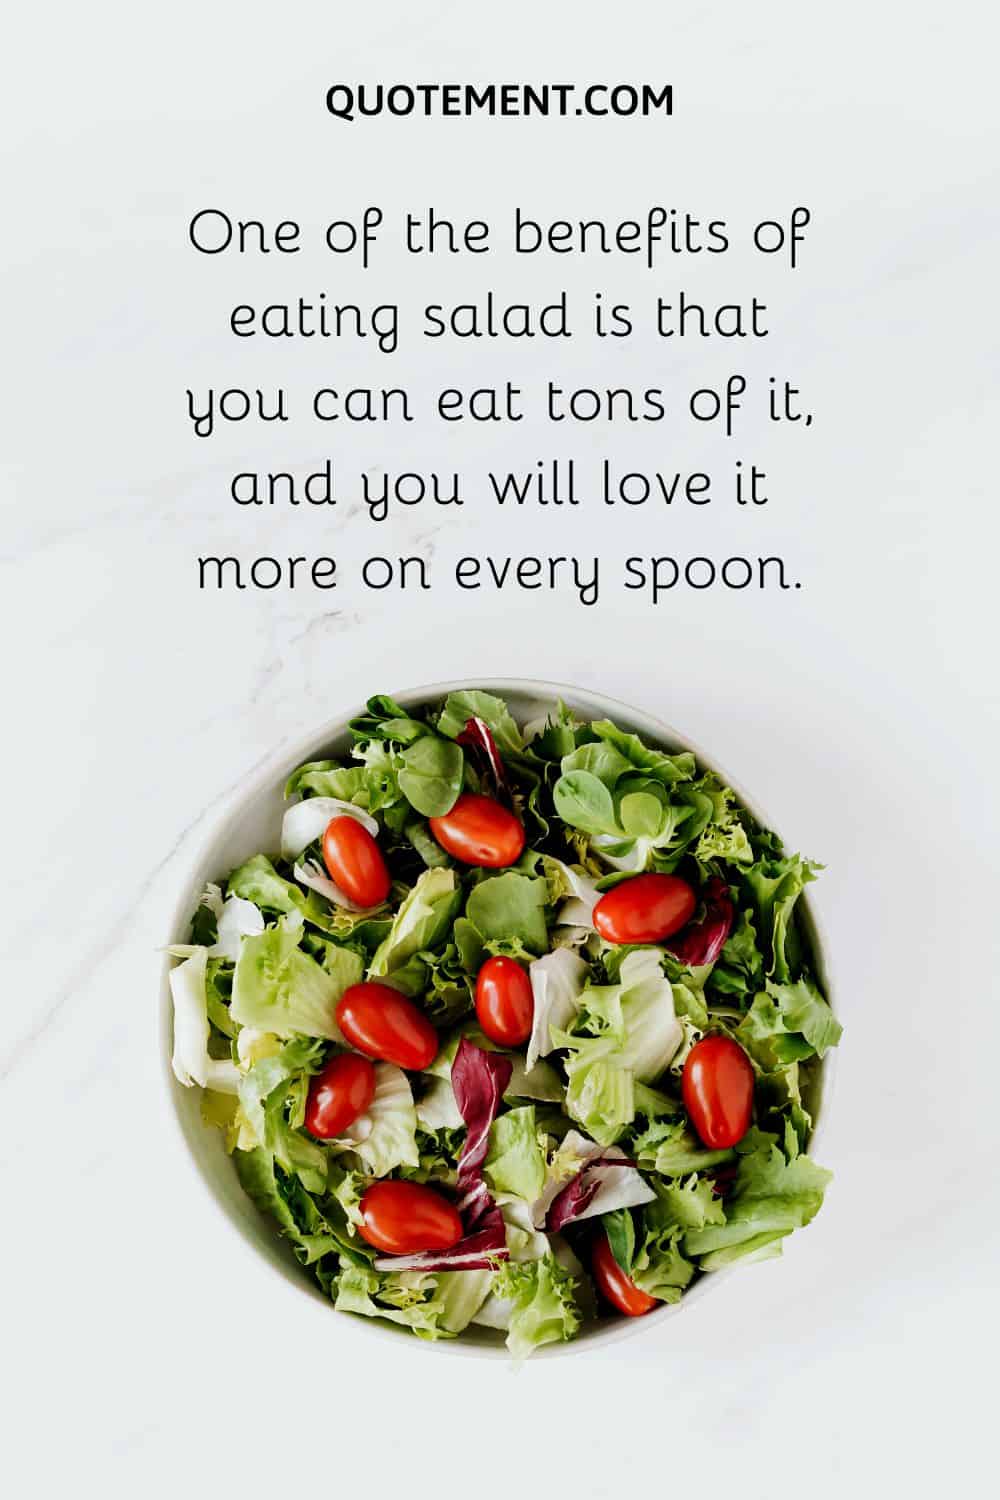 One of the benefits of eating salad is that you can eat tons of it